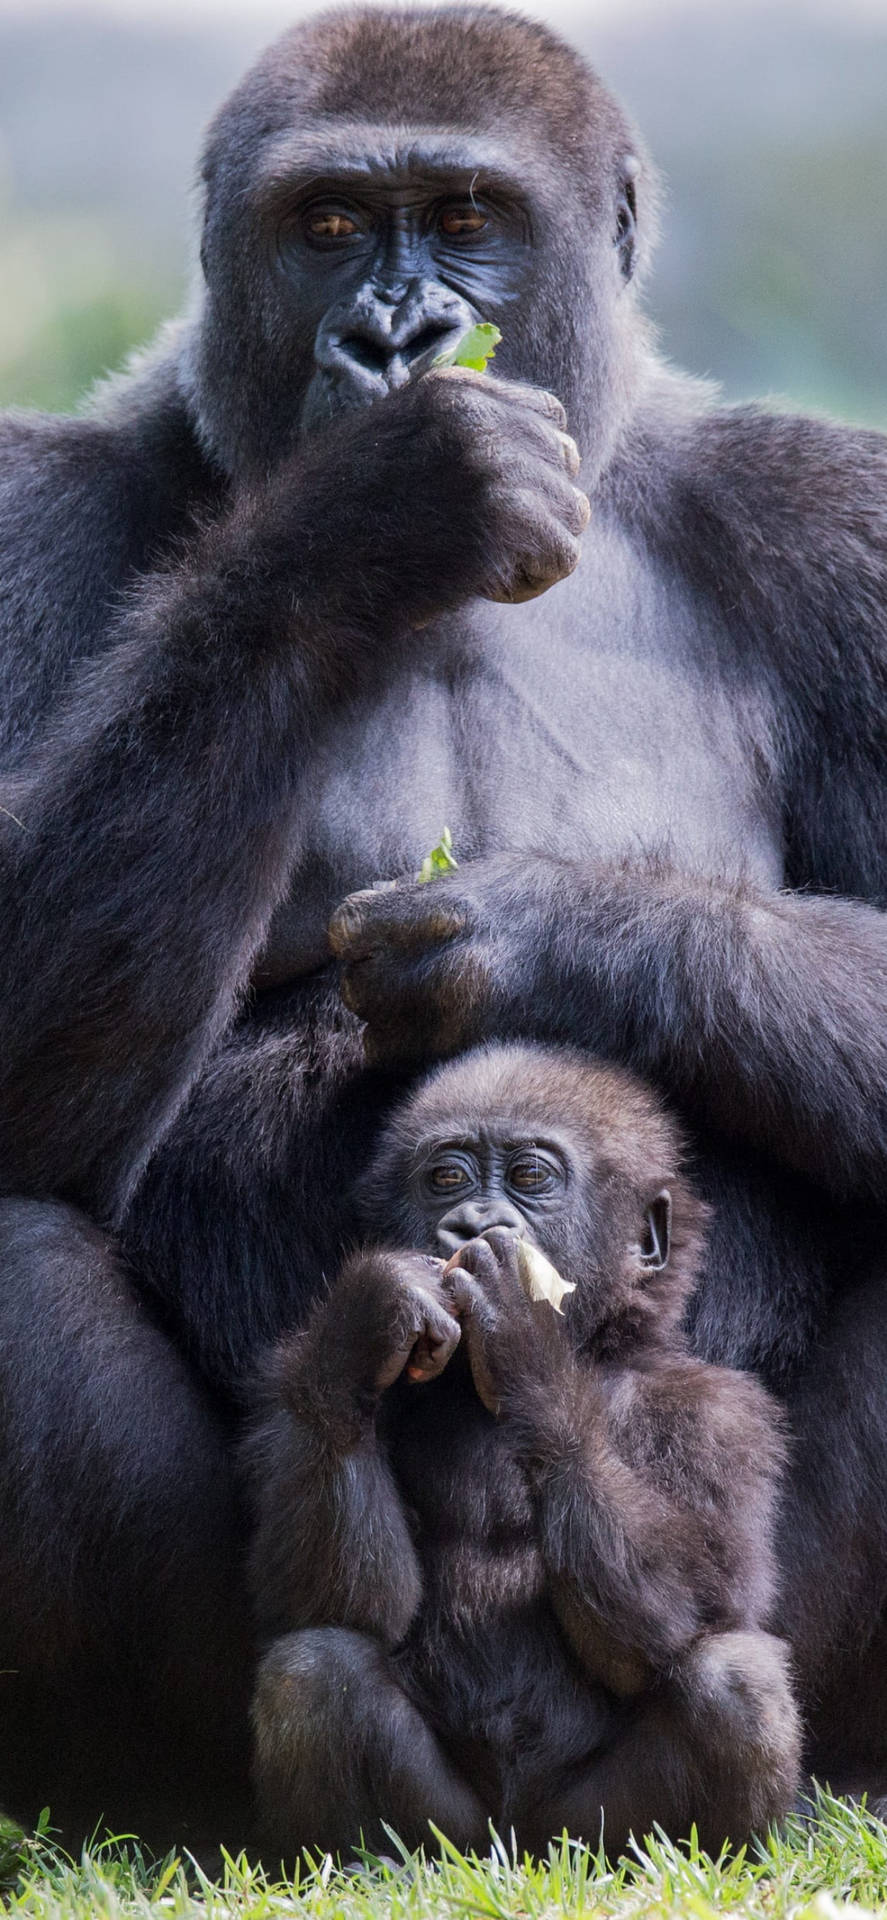 Eating Mother And Infant Gorilla Iphone